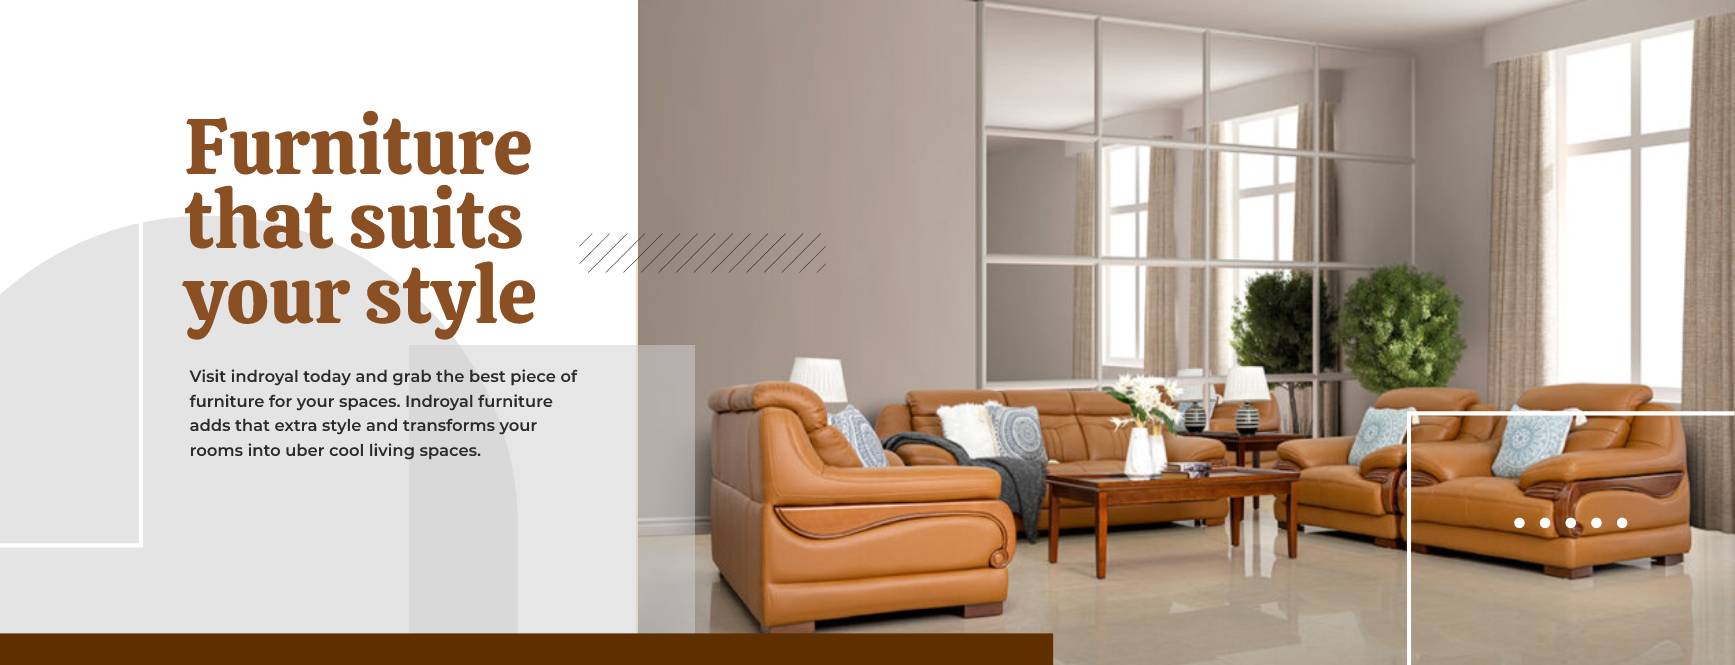 Indroyal Furniture - Sofas 